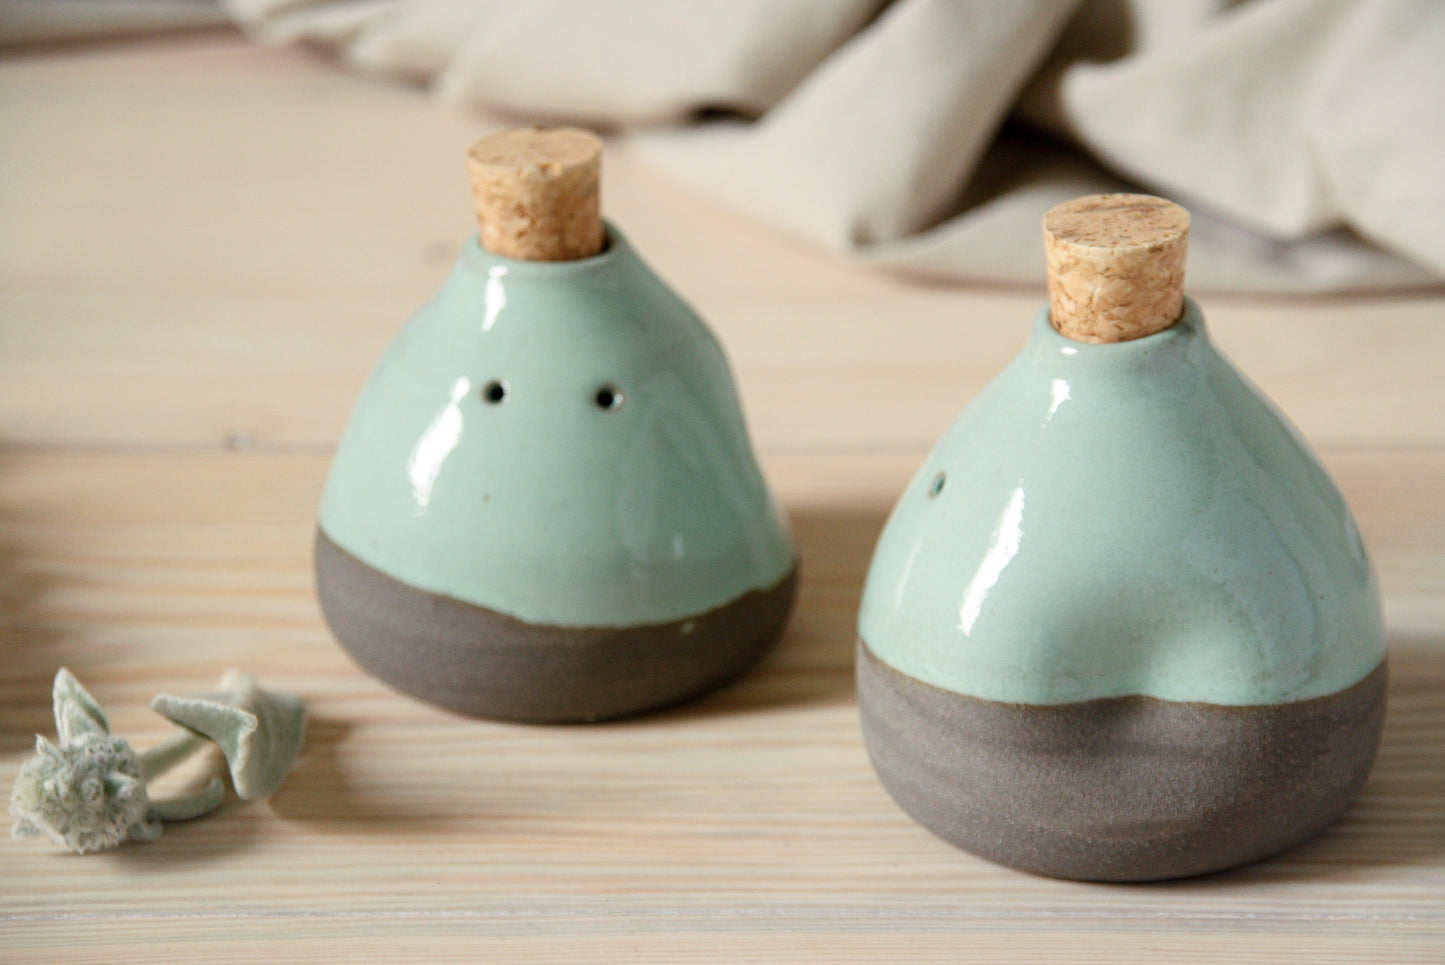 Ceramic salt and pepper schakers  set - grey with turquoise